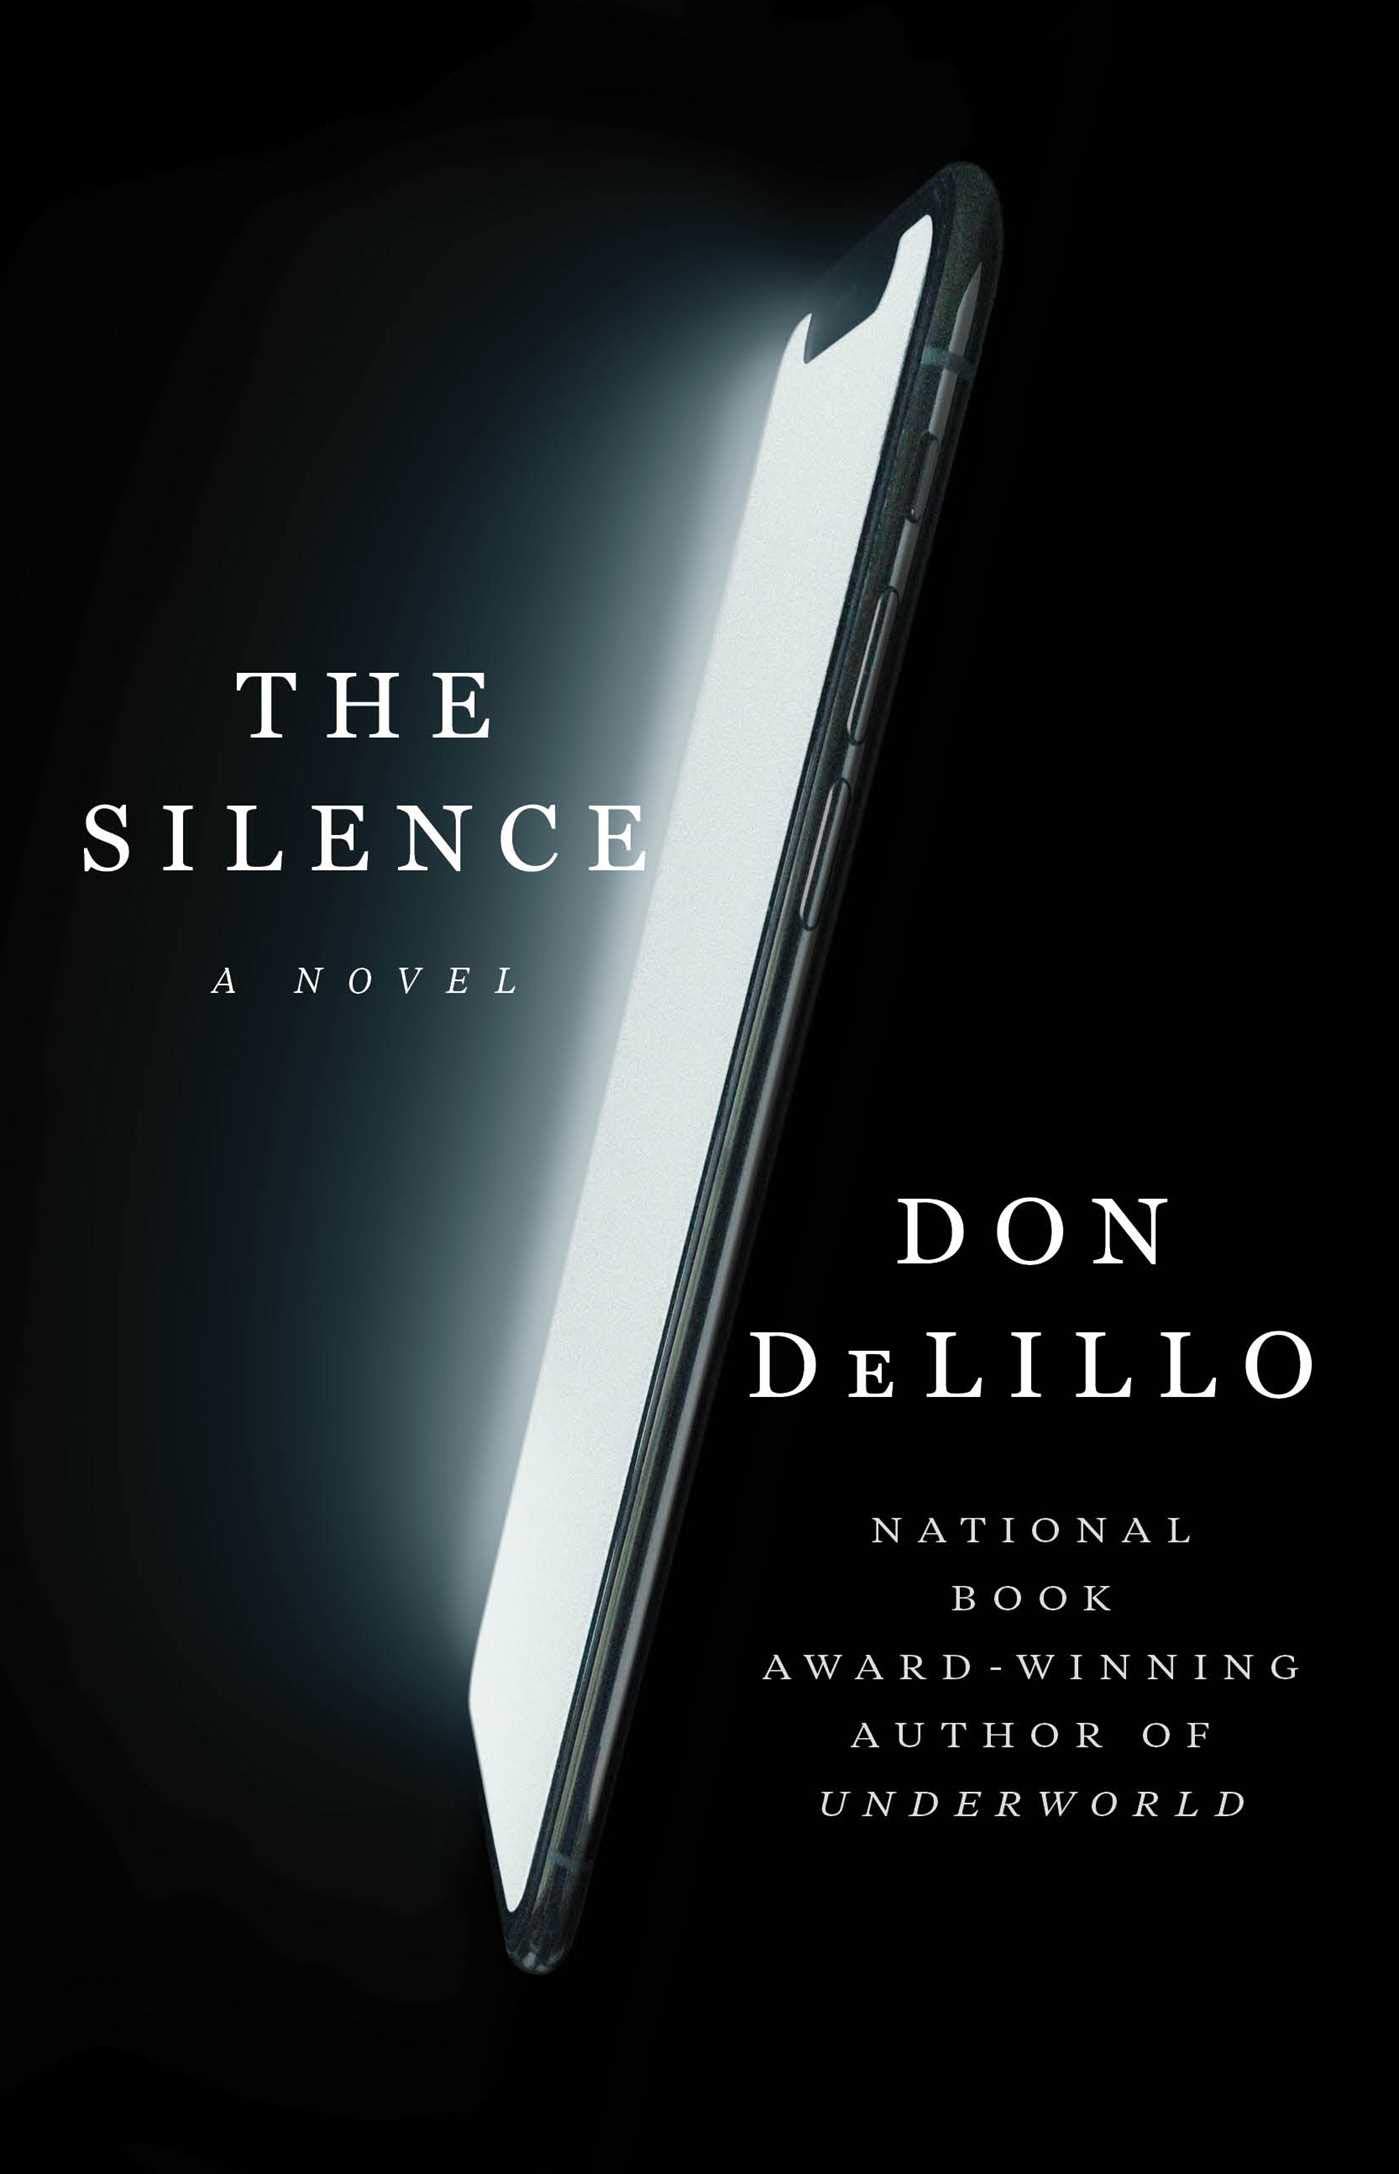 The Silence (book cover)